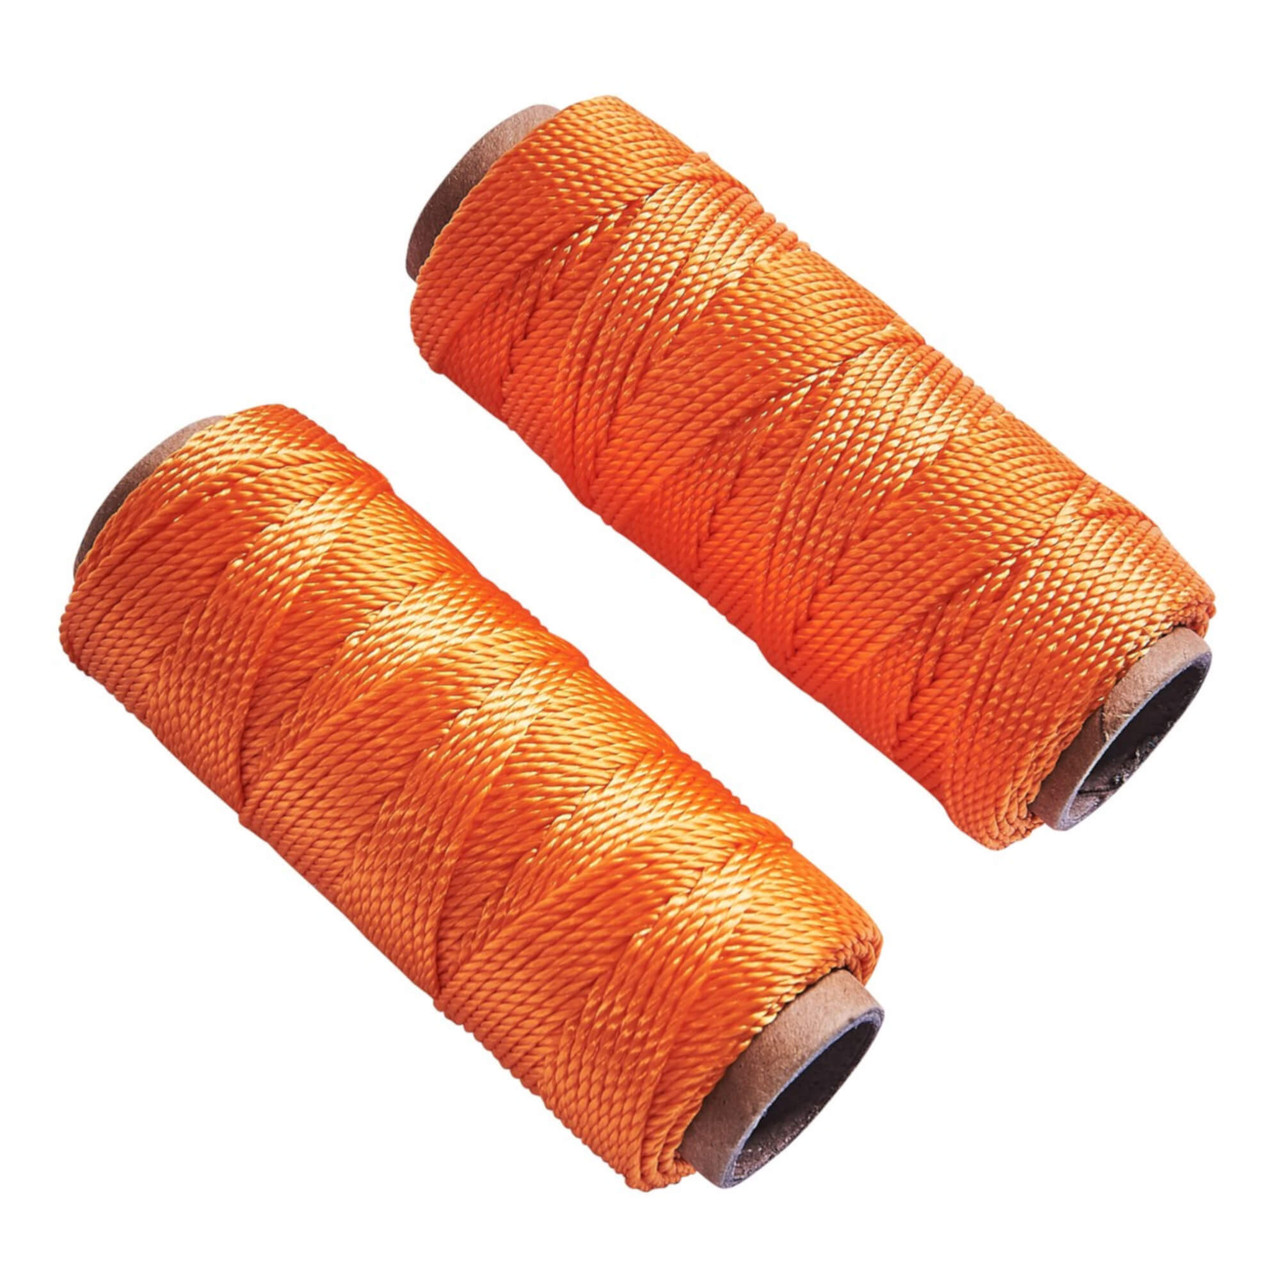 2x 50M Building Brick Laying Rope String Line Measuring Builders